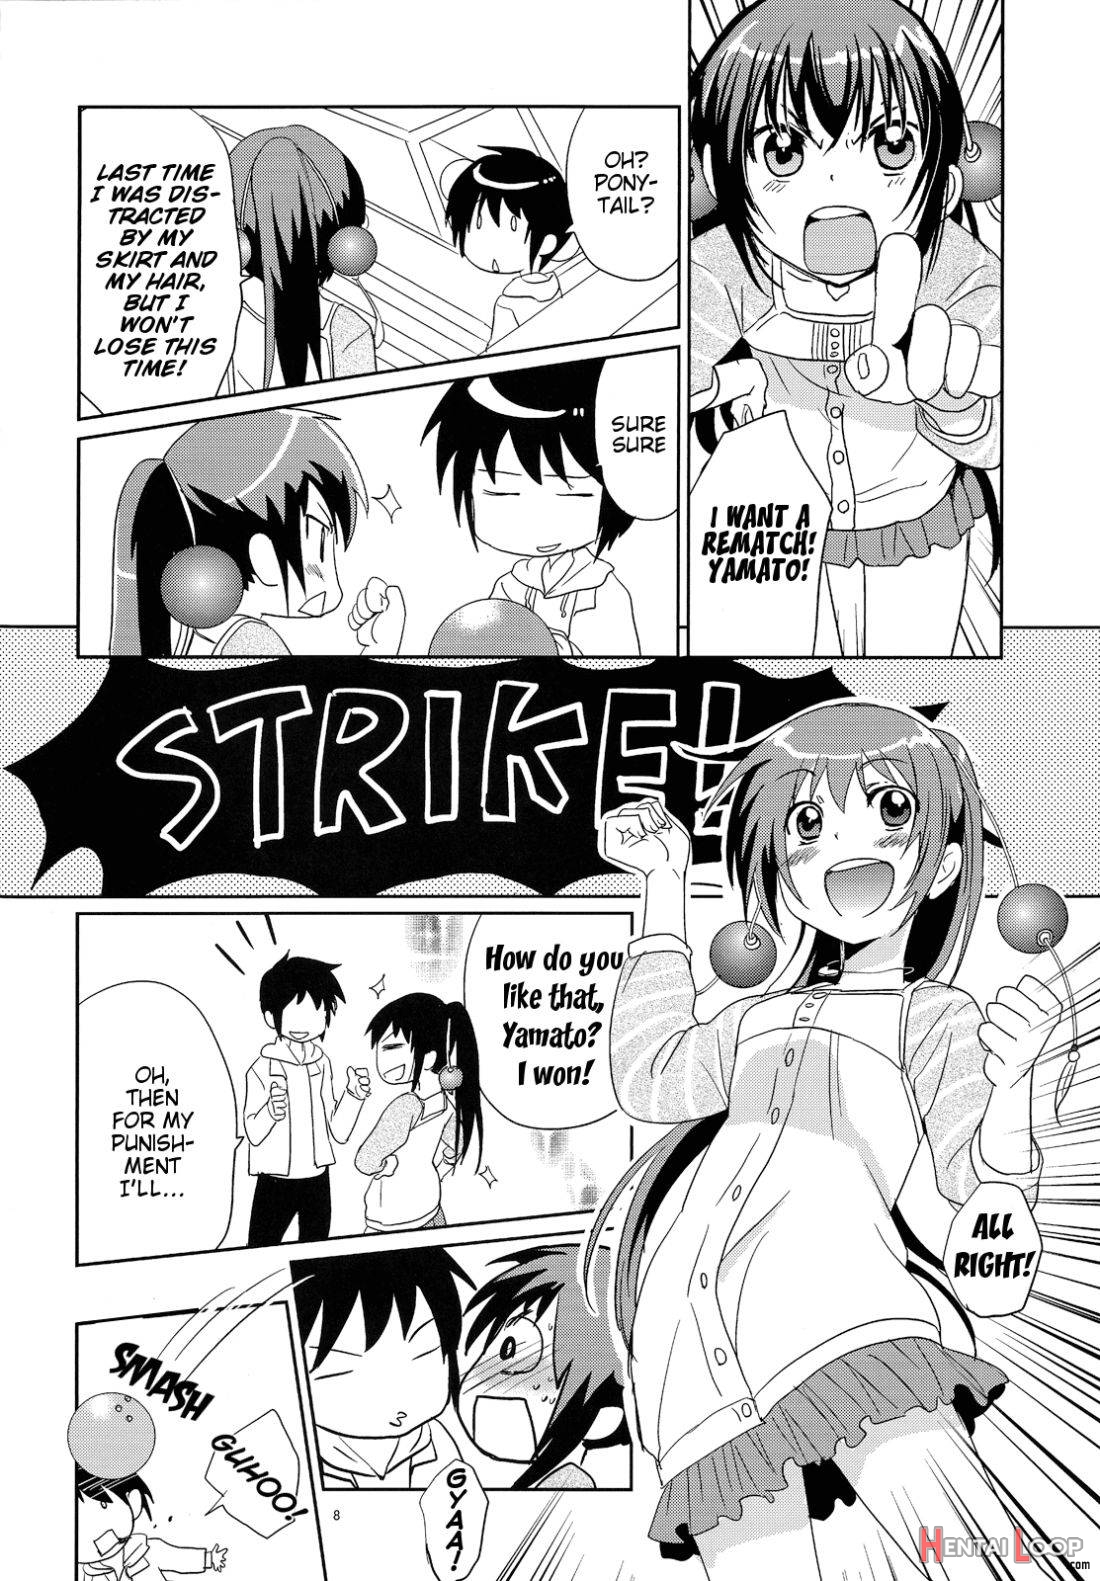 Wanko-san to Date! page 9